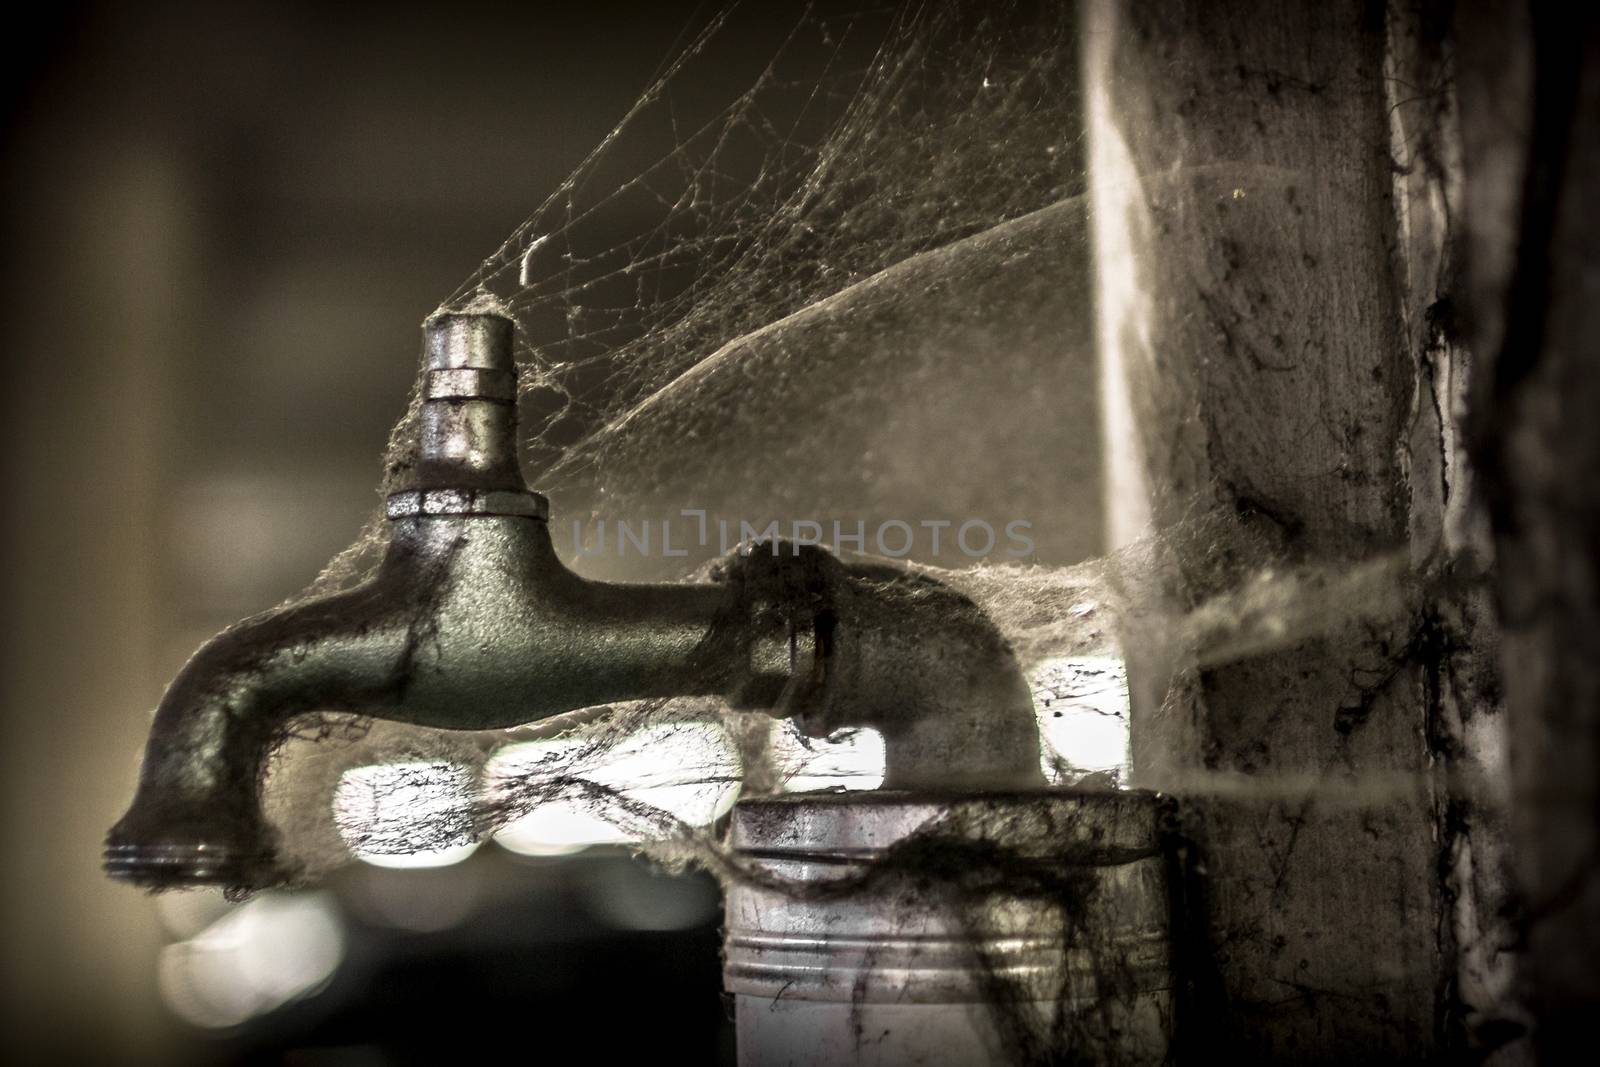 A tap covered with spider web, no more water.